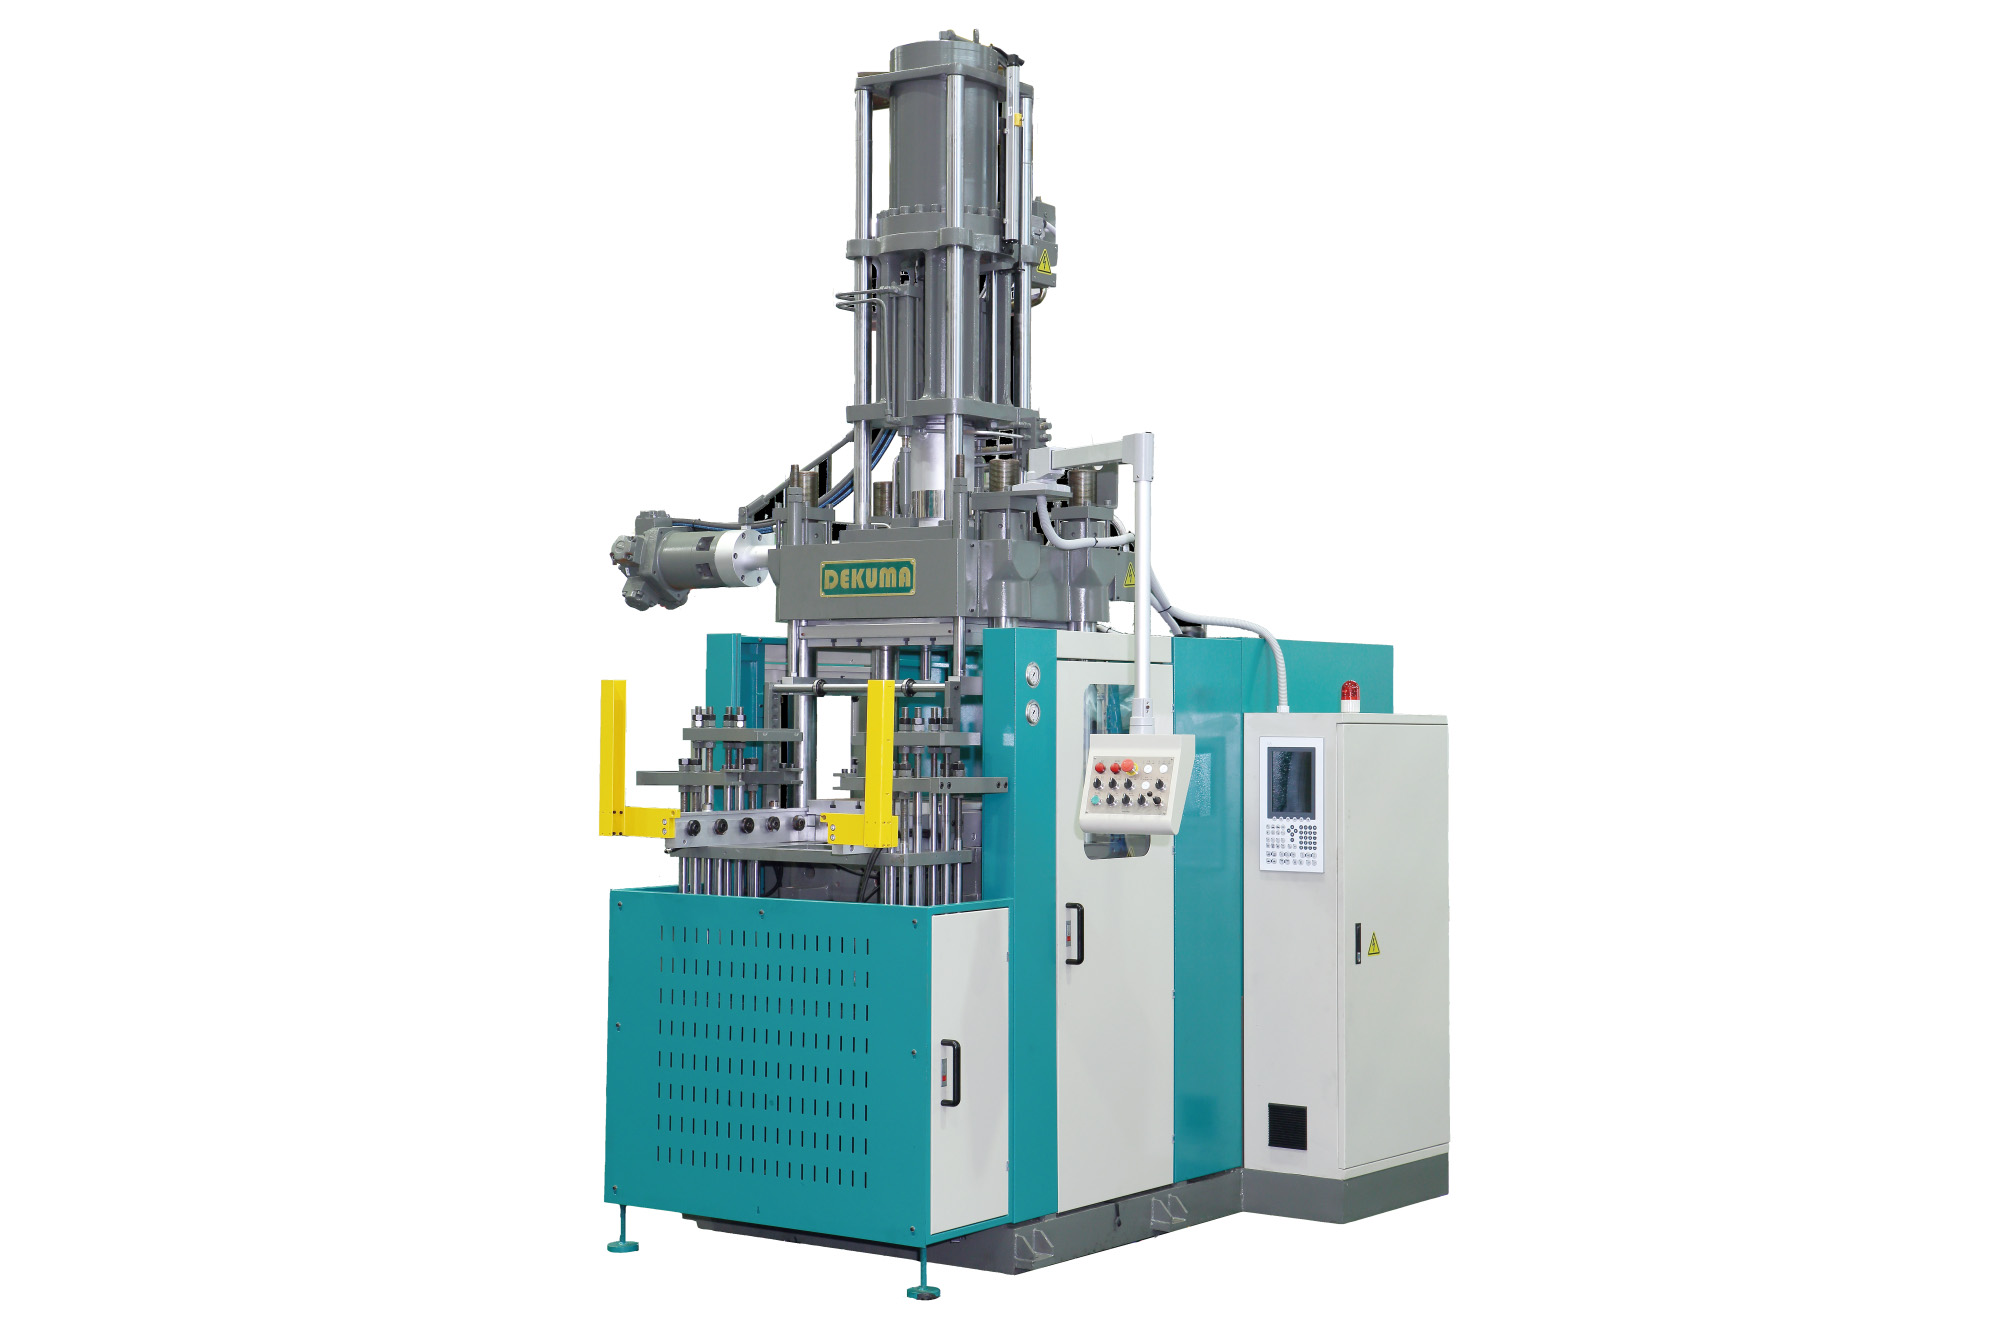 RV series rubber injection molding machine